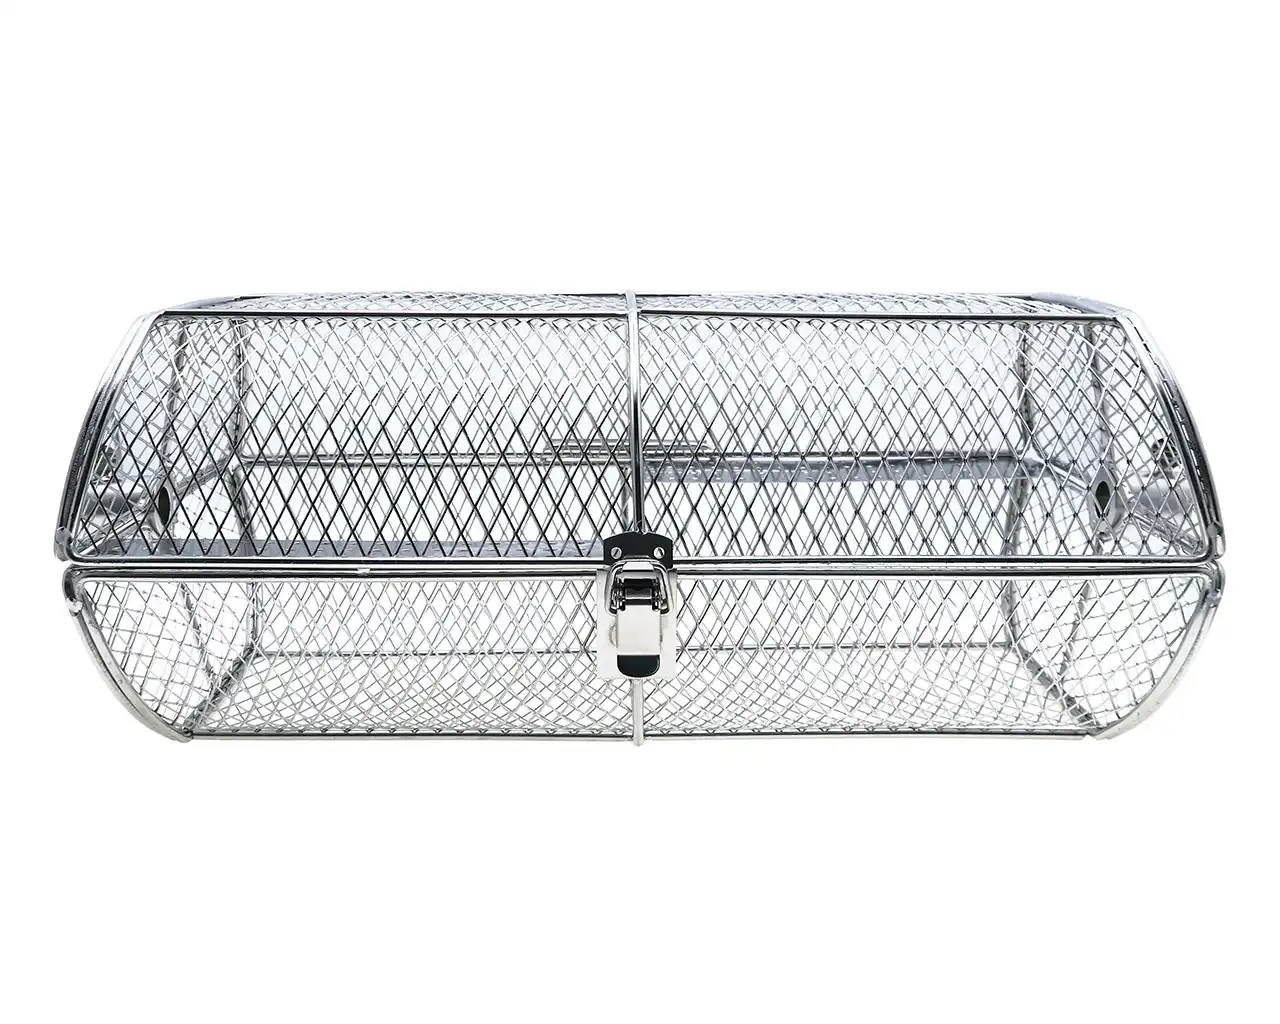 Pro Grill Stainless Steel Rotisserie Basket